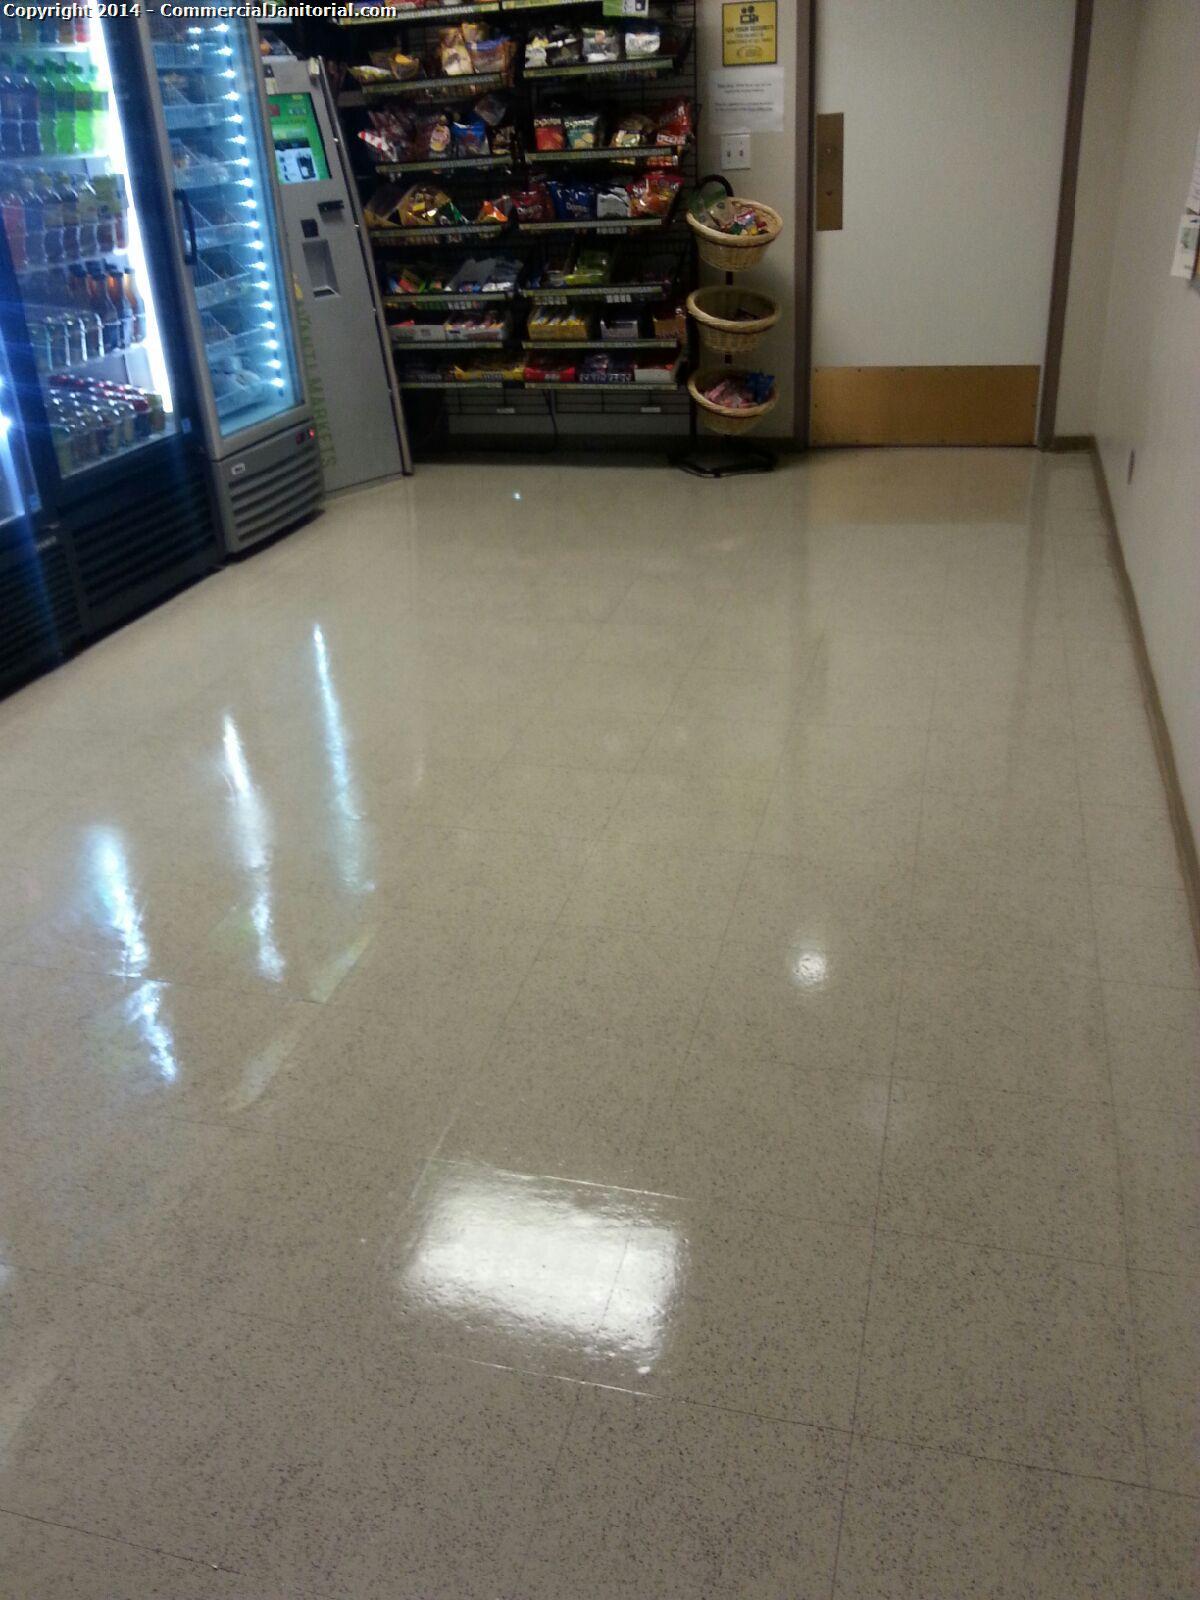 The VCT in the vending and break area is important to keep clean